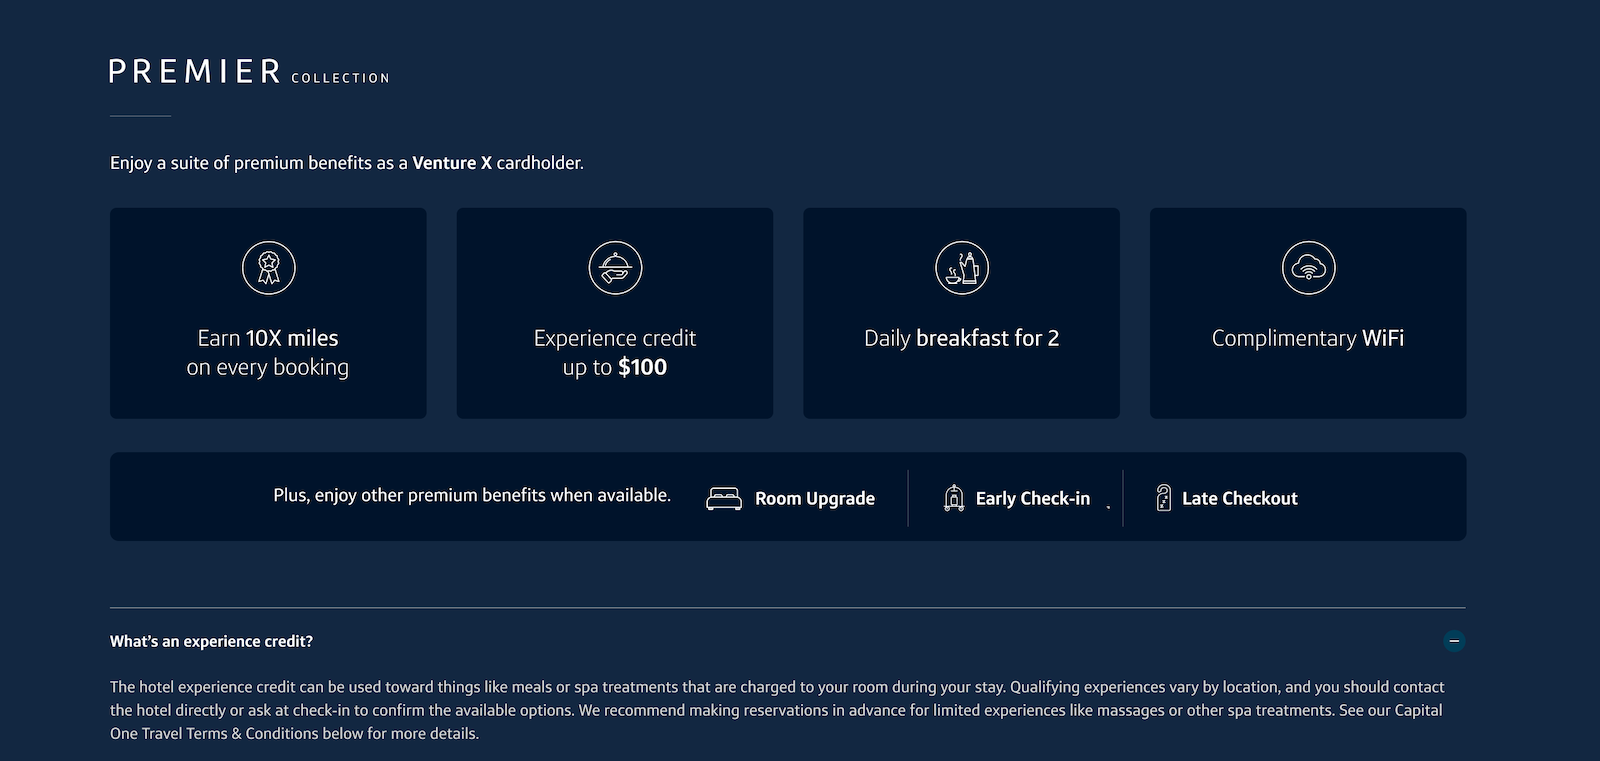 list of benefits for Capital One Premier Collection hotel bookings